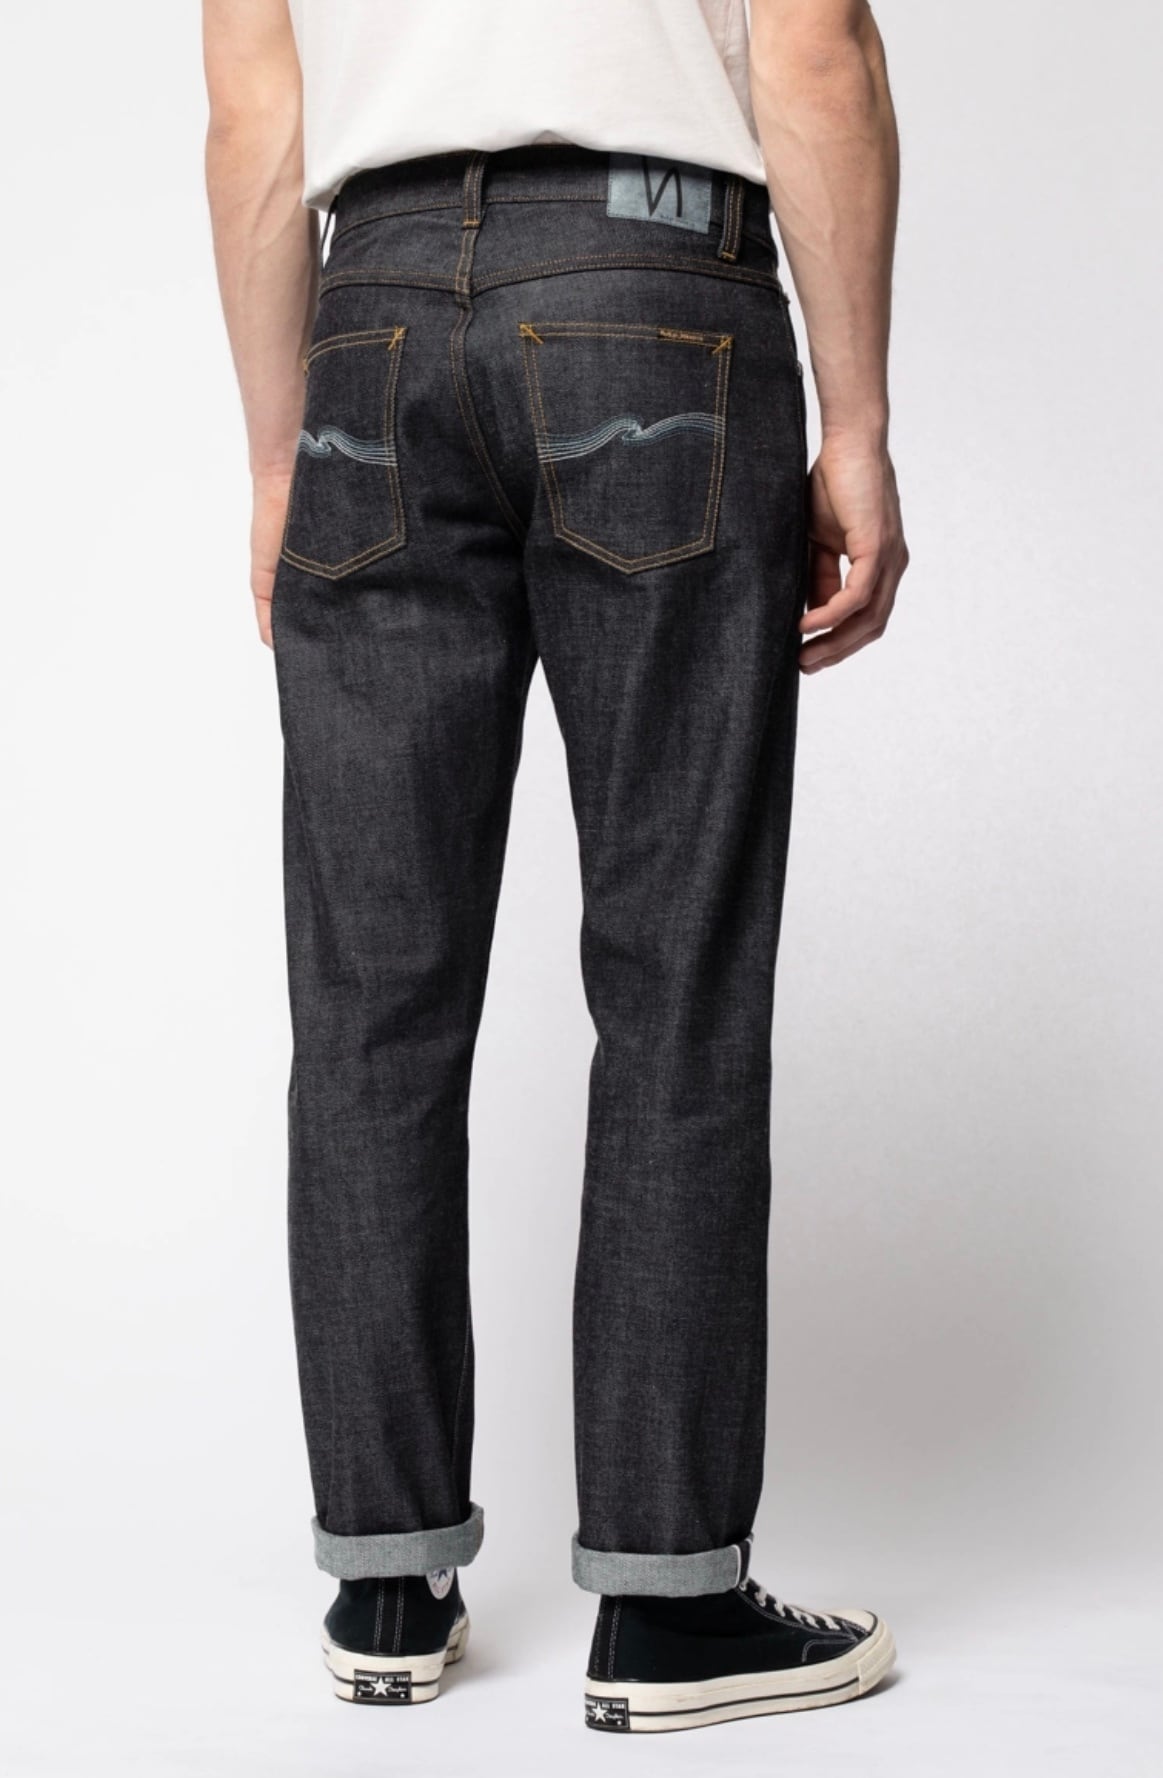 Nudie jeans ヌーディージーンズ Gritty Jackson Blue W30L30 | An